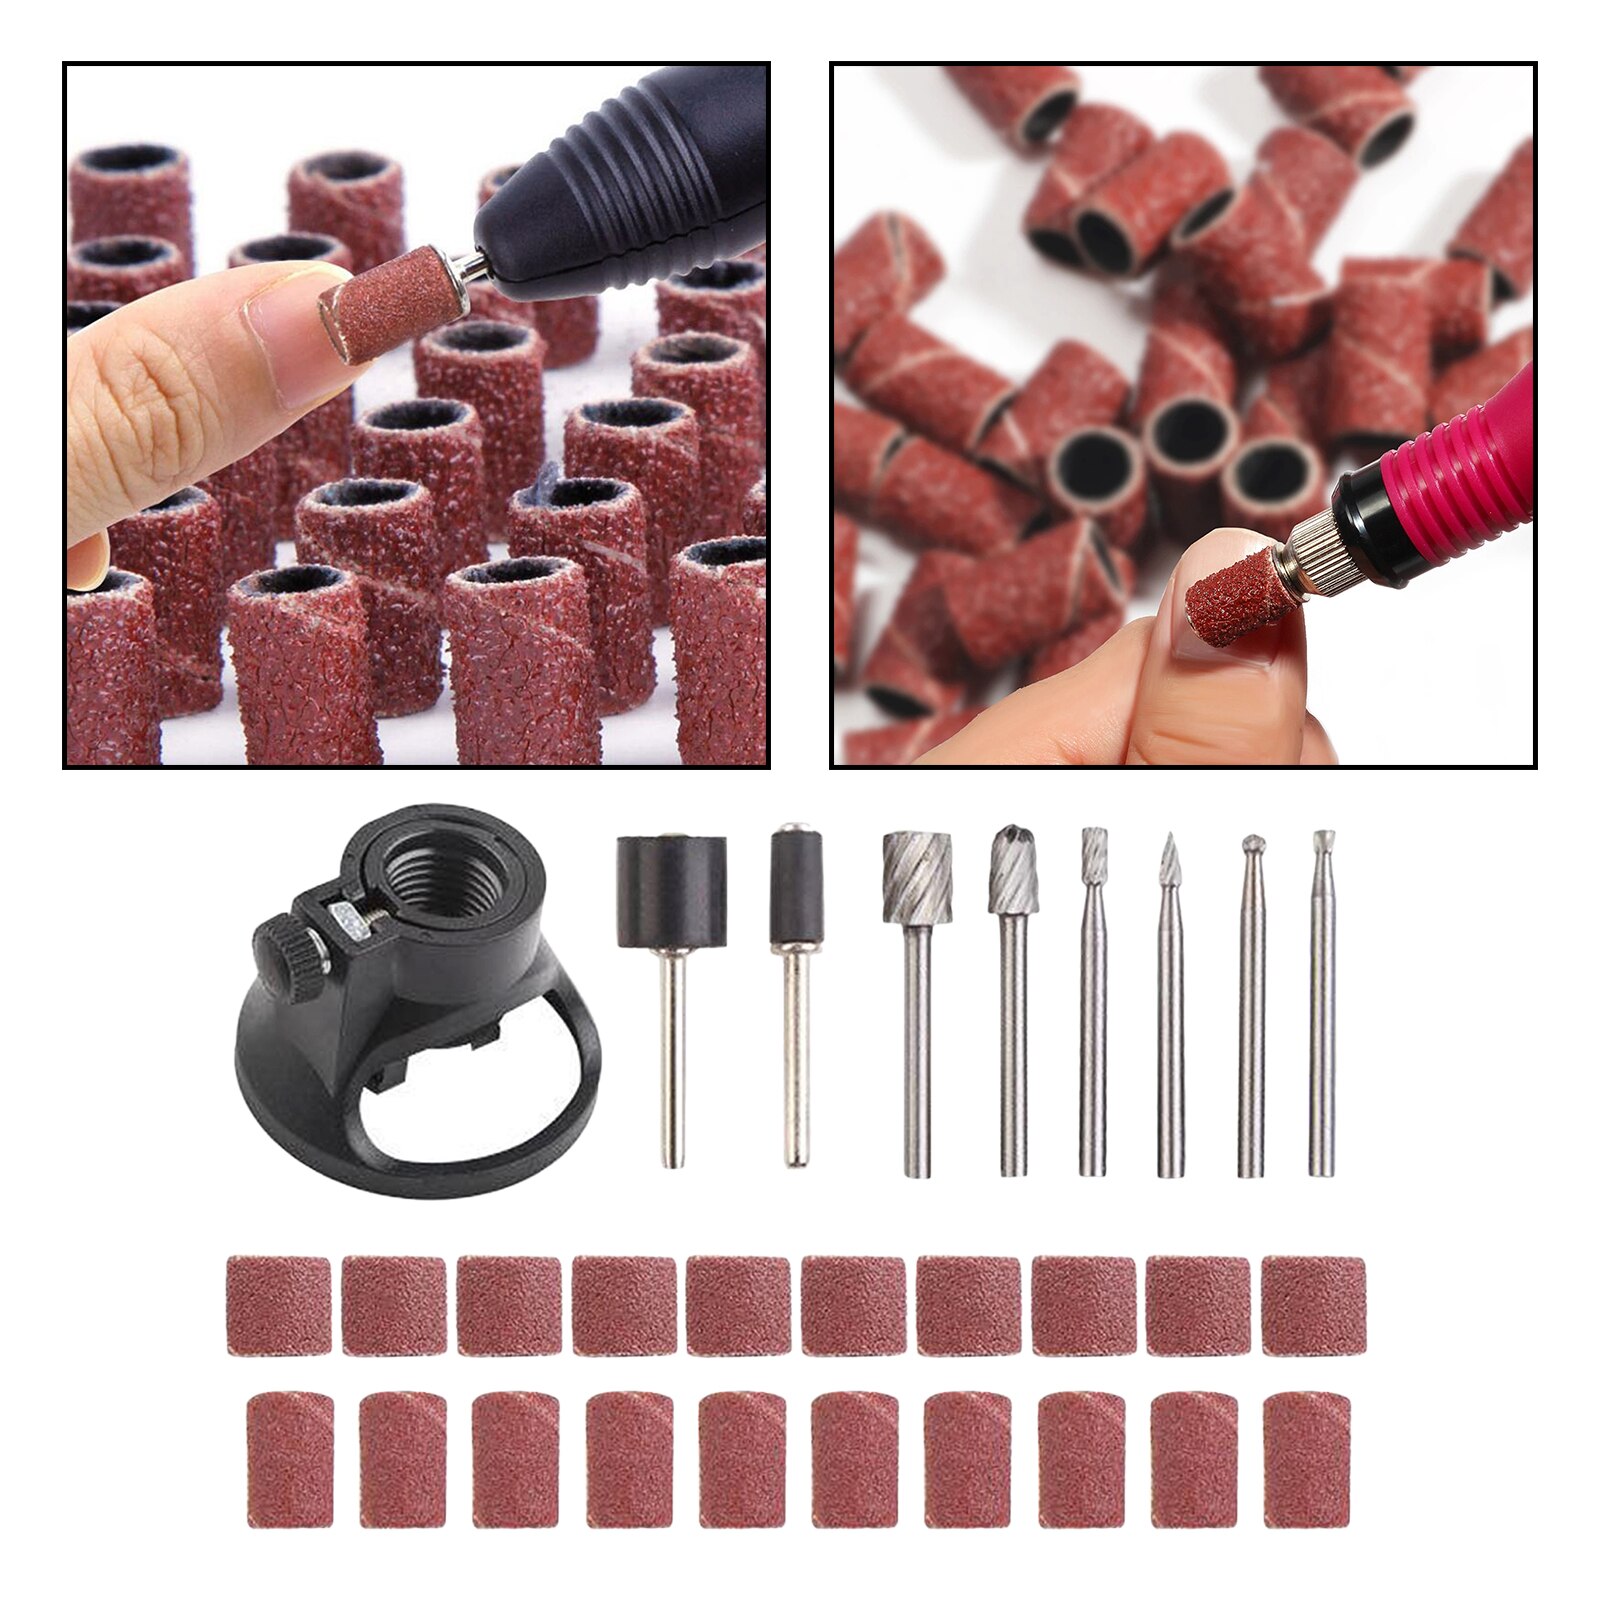 Sanding Drum Kit 29pcs 80/180 Grit for Rotary Drill Accessories Tools